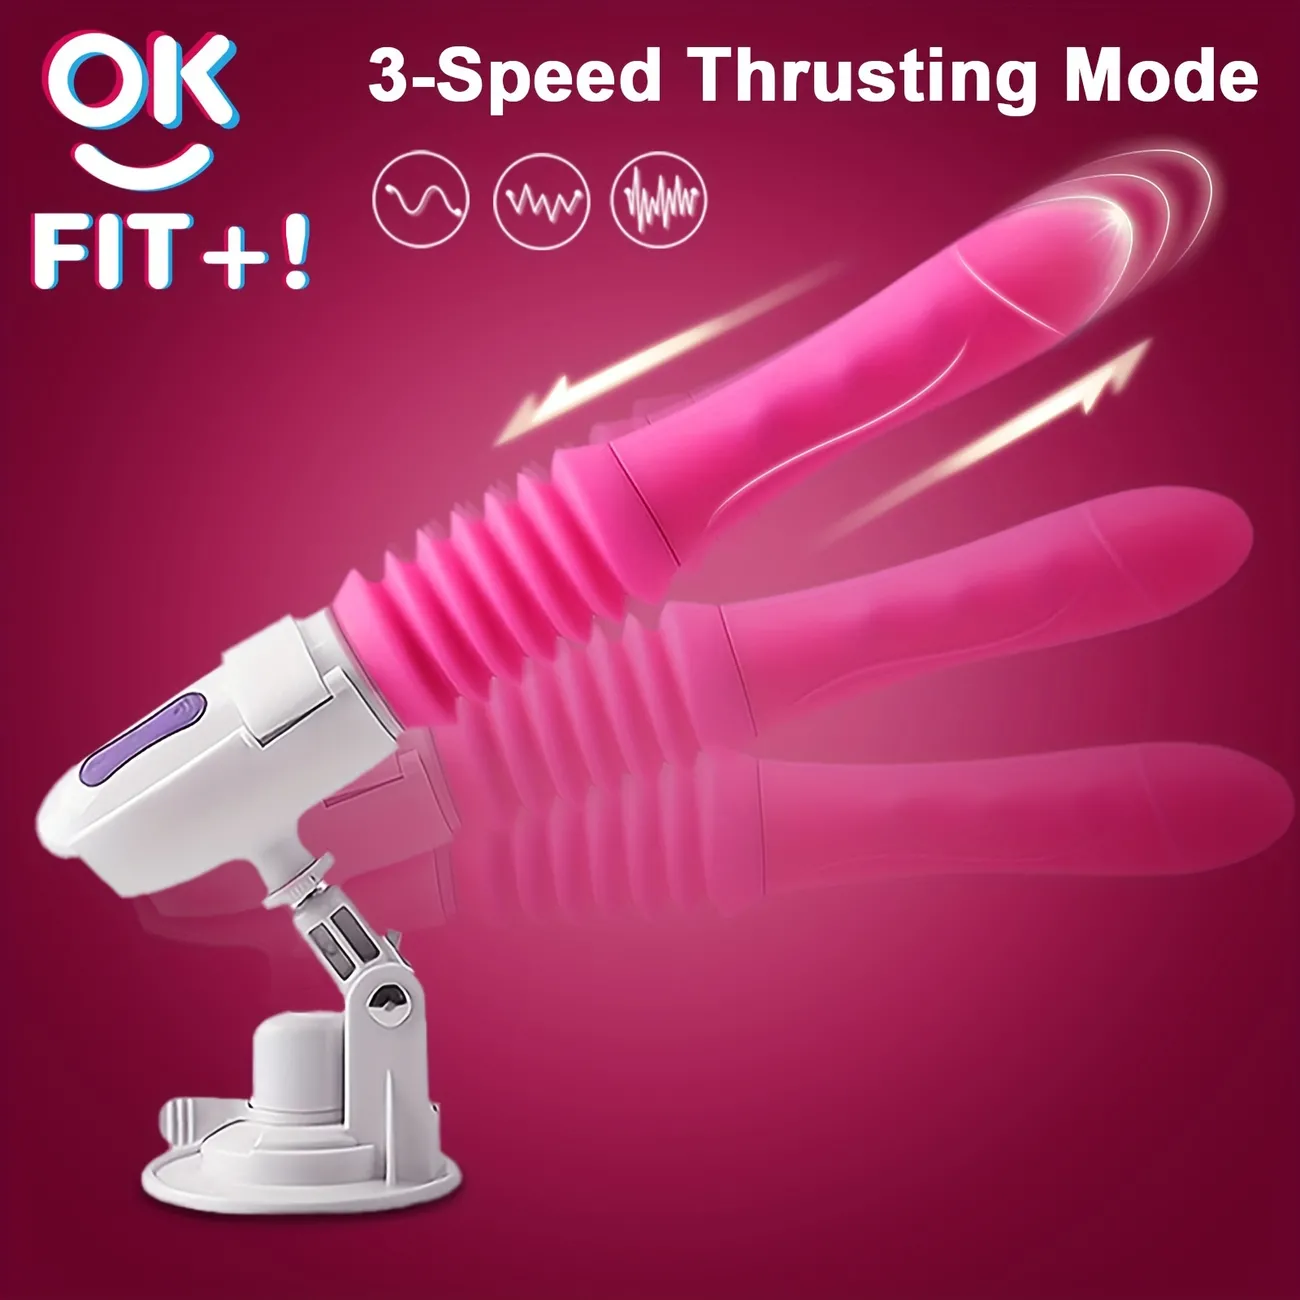 Thrusting Realistic Dildo Vibrator With Strong Suction Cup, Anal Prostate Play Adult Sex Toys G Spot For Women, G Spot Stimulator Masturbation Massive Anal Dildo For Gay Men Women Couples Pleasure -